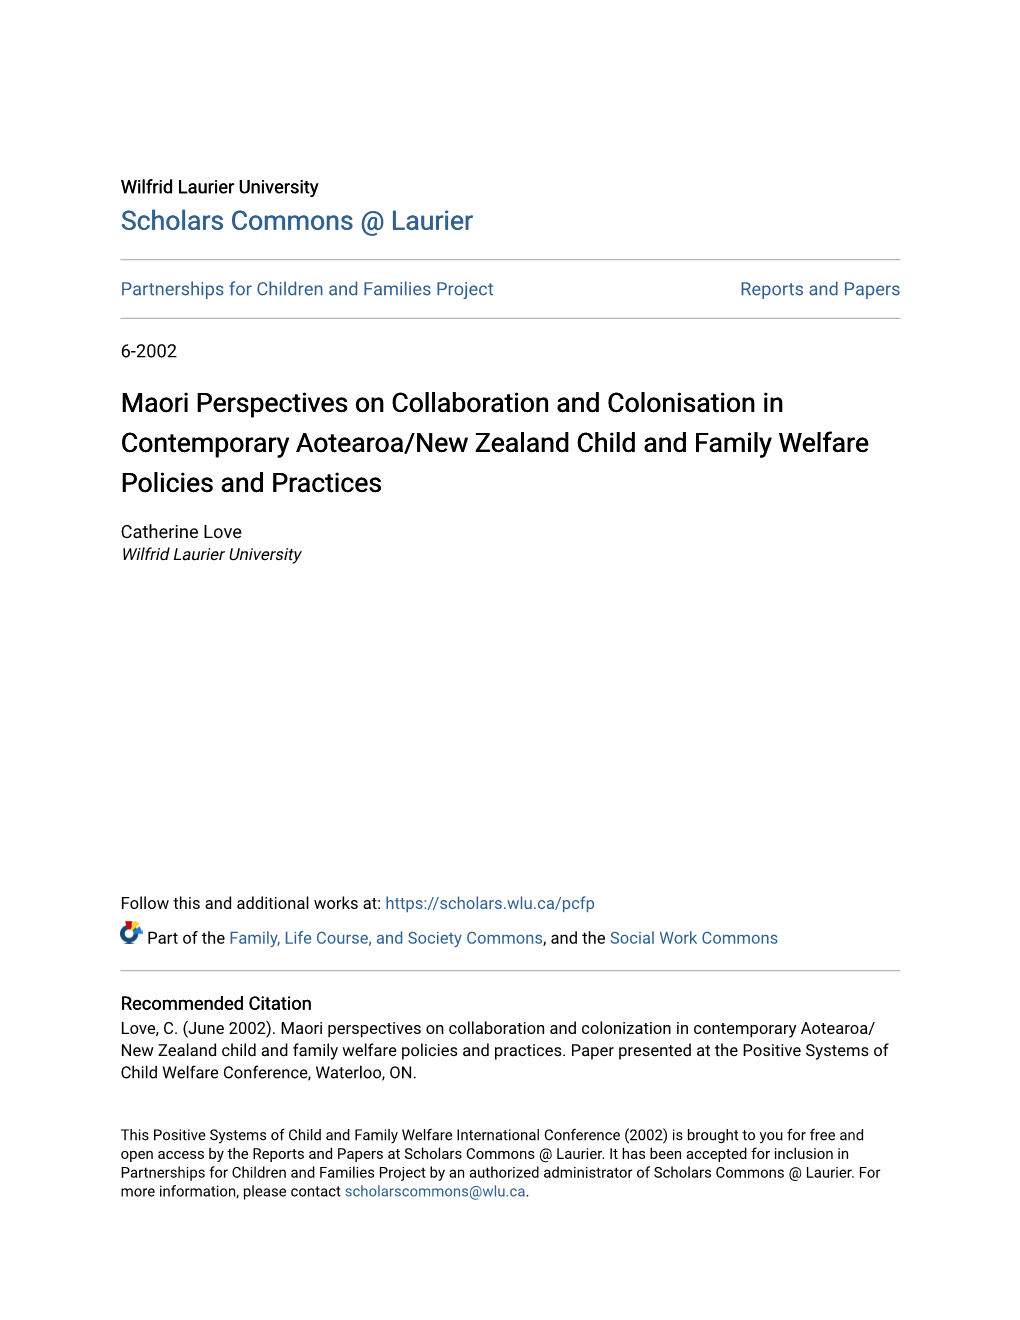 Maori Perspectives on Collaboration and Colonisation in Contemporary Aotearoa/New Zealand Child and Family Welfare Policies and Practices